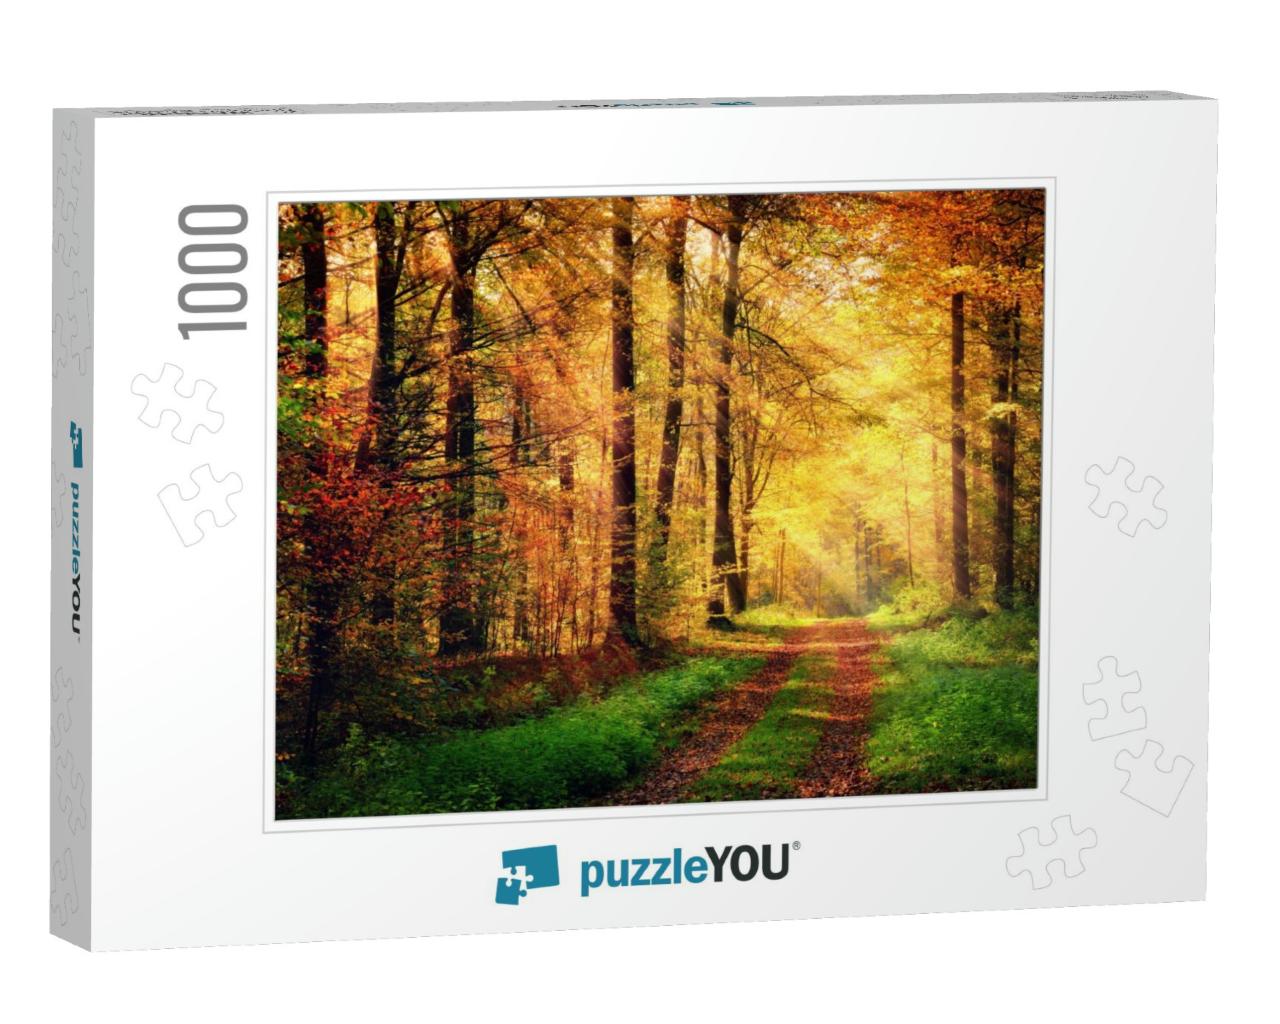 Autumn Forest Scenery with Rays of Warm Light Illumining... Jigsaw Puzzle with 1000 pieces